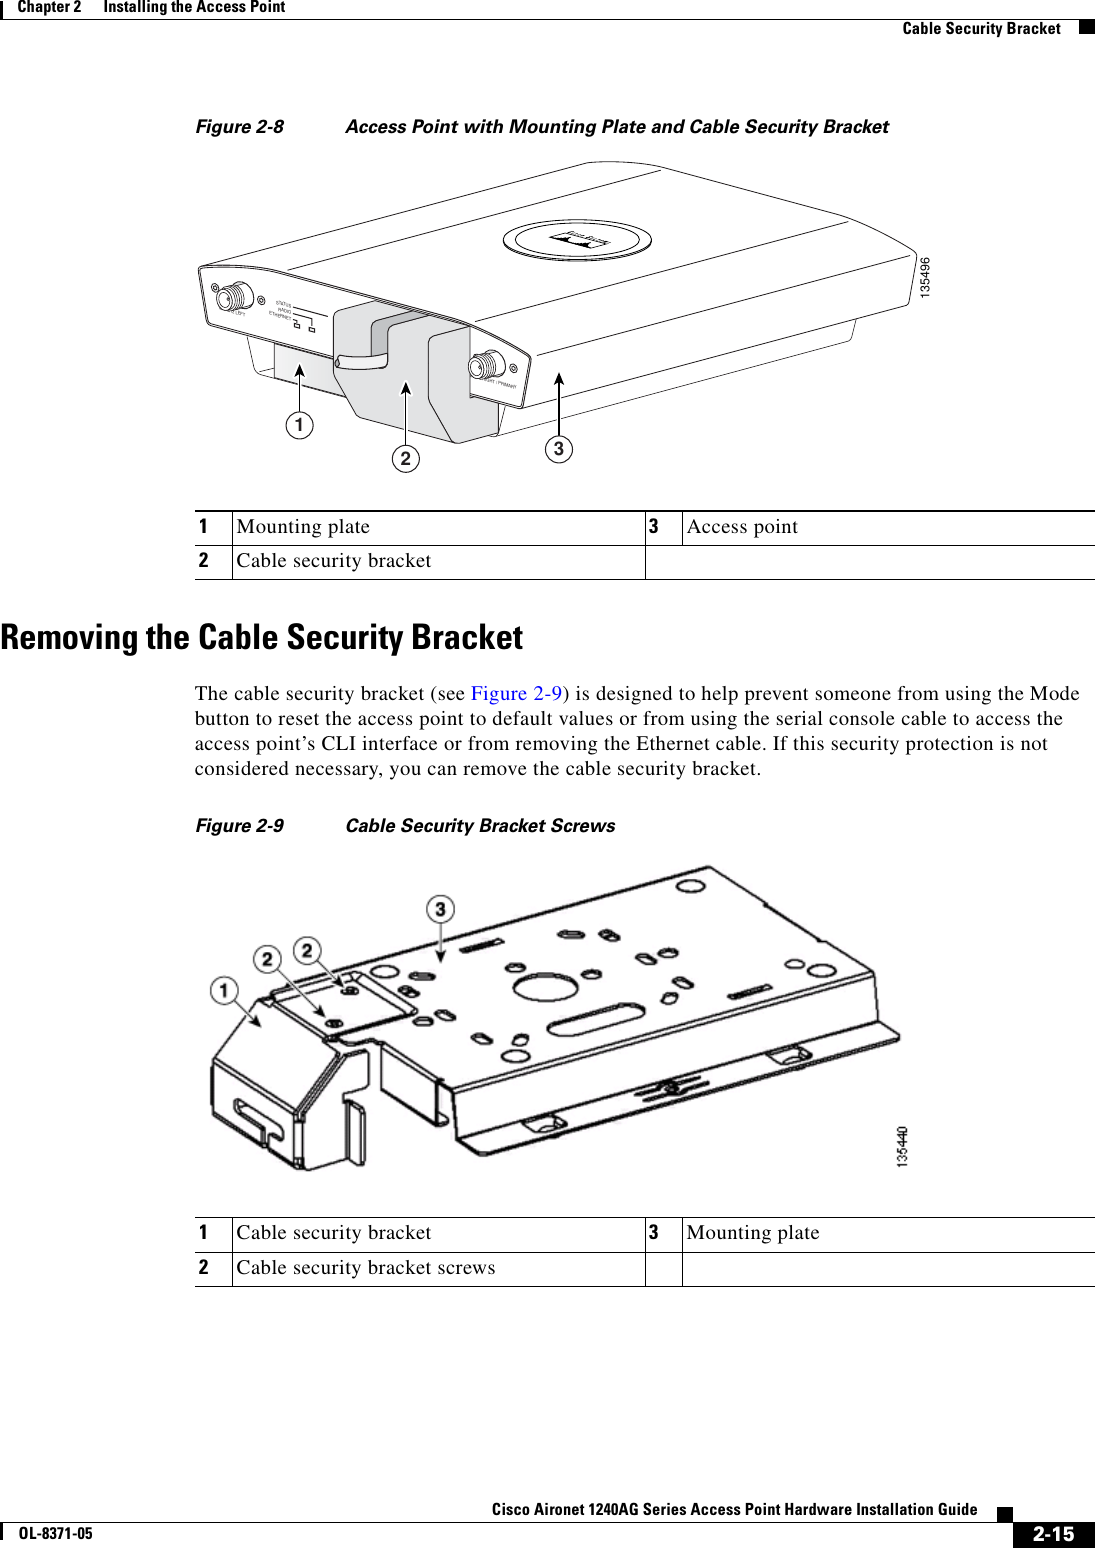  2-15Cisco Aironet 1240AG Series Access Point Hardware Installation GuideOL-8371-05Chapter 2      Installing the Access PointCable Security BracketFigure 2-8 Access Point with Mounting Plate and Cable Security Bracket Removing the Cable Security BracketThe cable security bracket (see Figure 2-9) is designed to help prevent someone from using the Mode button to reset the access point to default values or from using the serial console cable to access the access point’s CLI interface or from removing the Ethernet cable. If this security protection is not considered necessary, you can remove the cable security bracket.Figure 2-9 Cable Security Bracket Screws1Mounting plate 3Access point2Cable security bracket1354962.4 GHz RIGHT / PRIMARY 2.4 GHz LEFTSTATUSRADIOETHERNETETHERNET 48VDC3211Cable security bracket 3Mounting plate2Cable security bracket screws